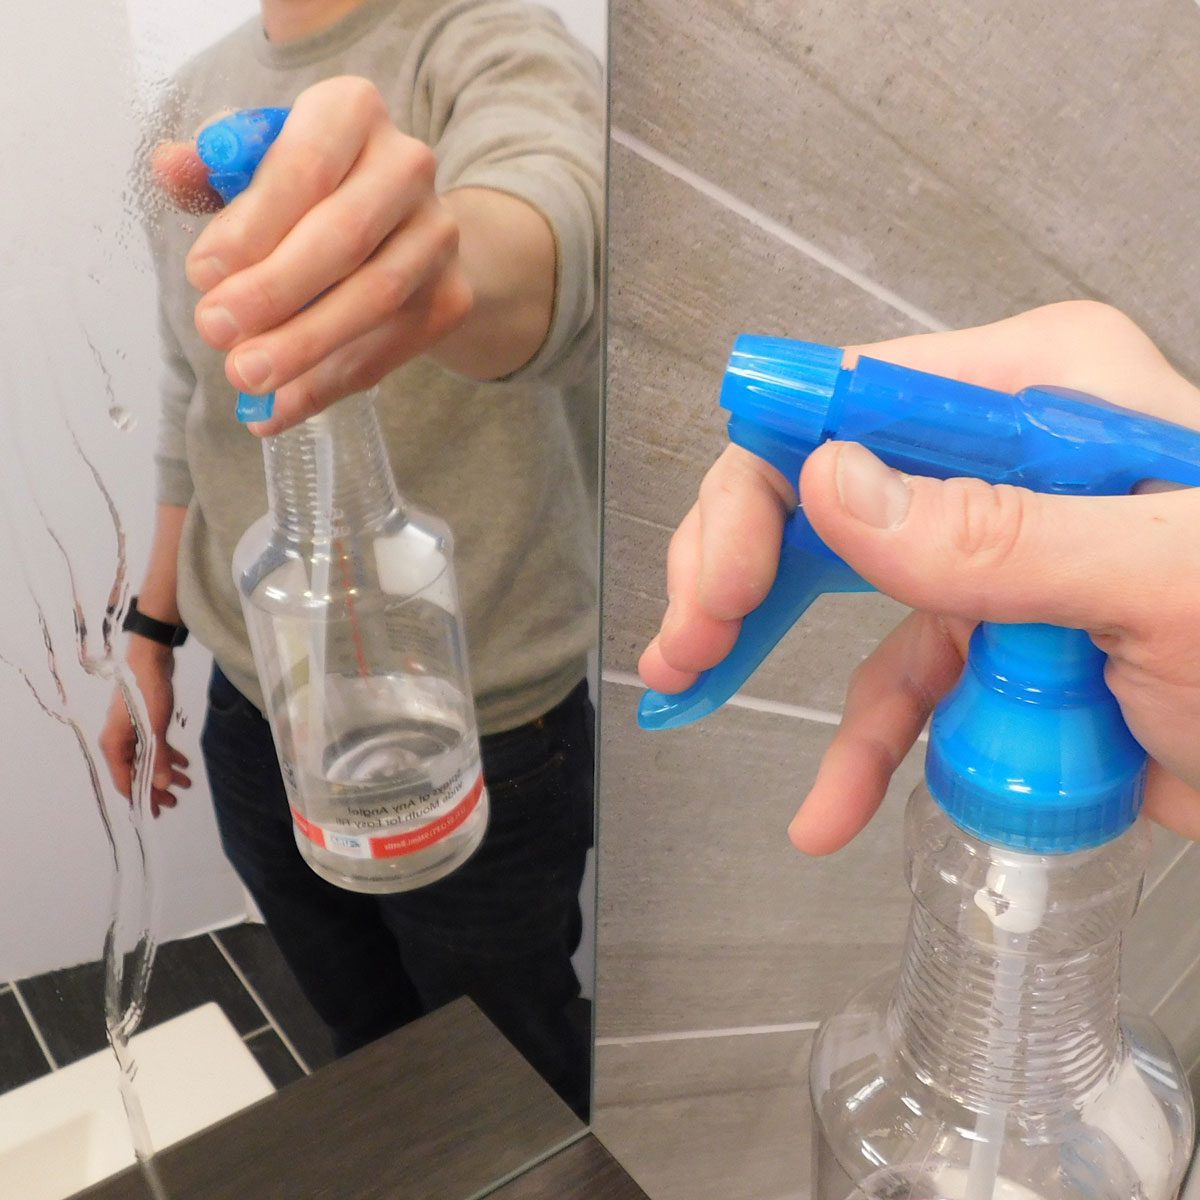 How To Clean A Mirror In 3 Simple Steps